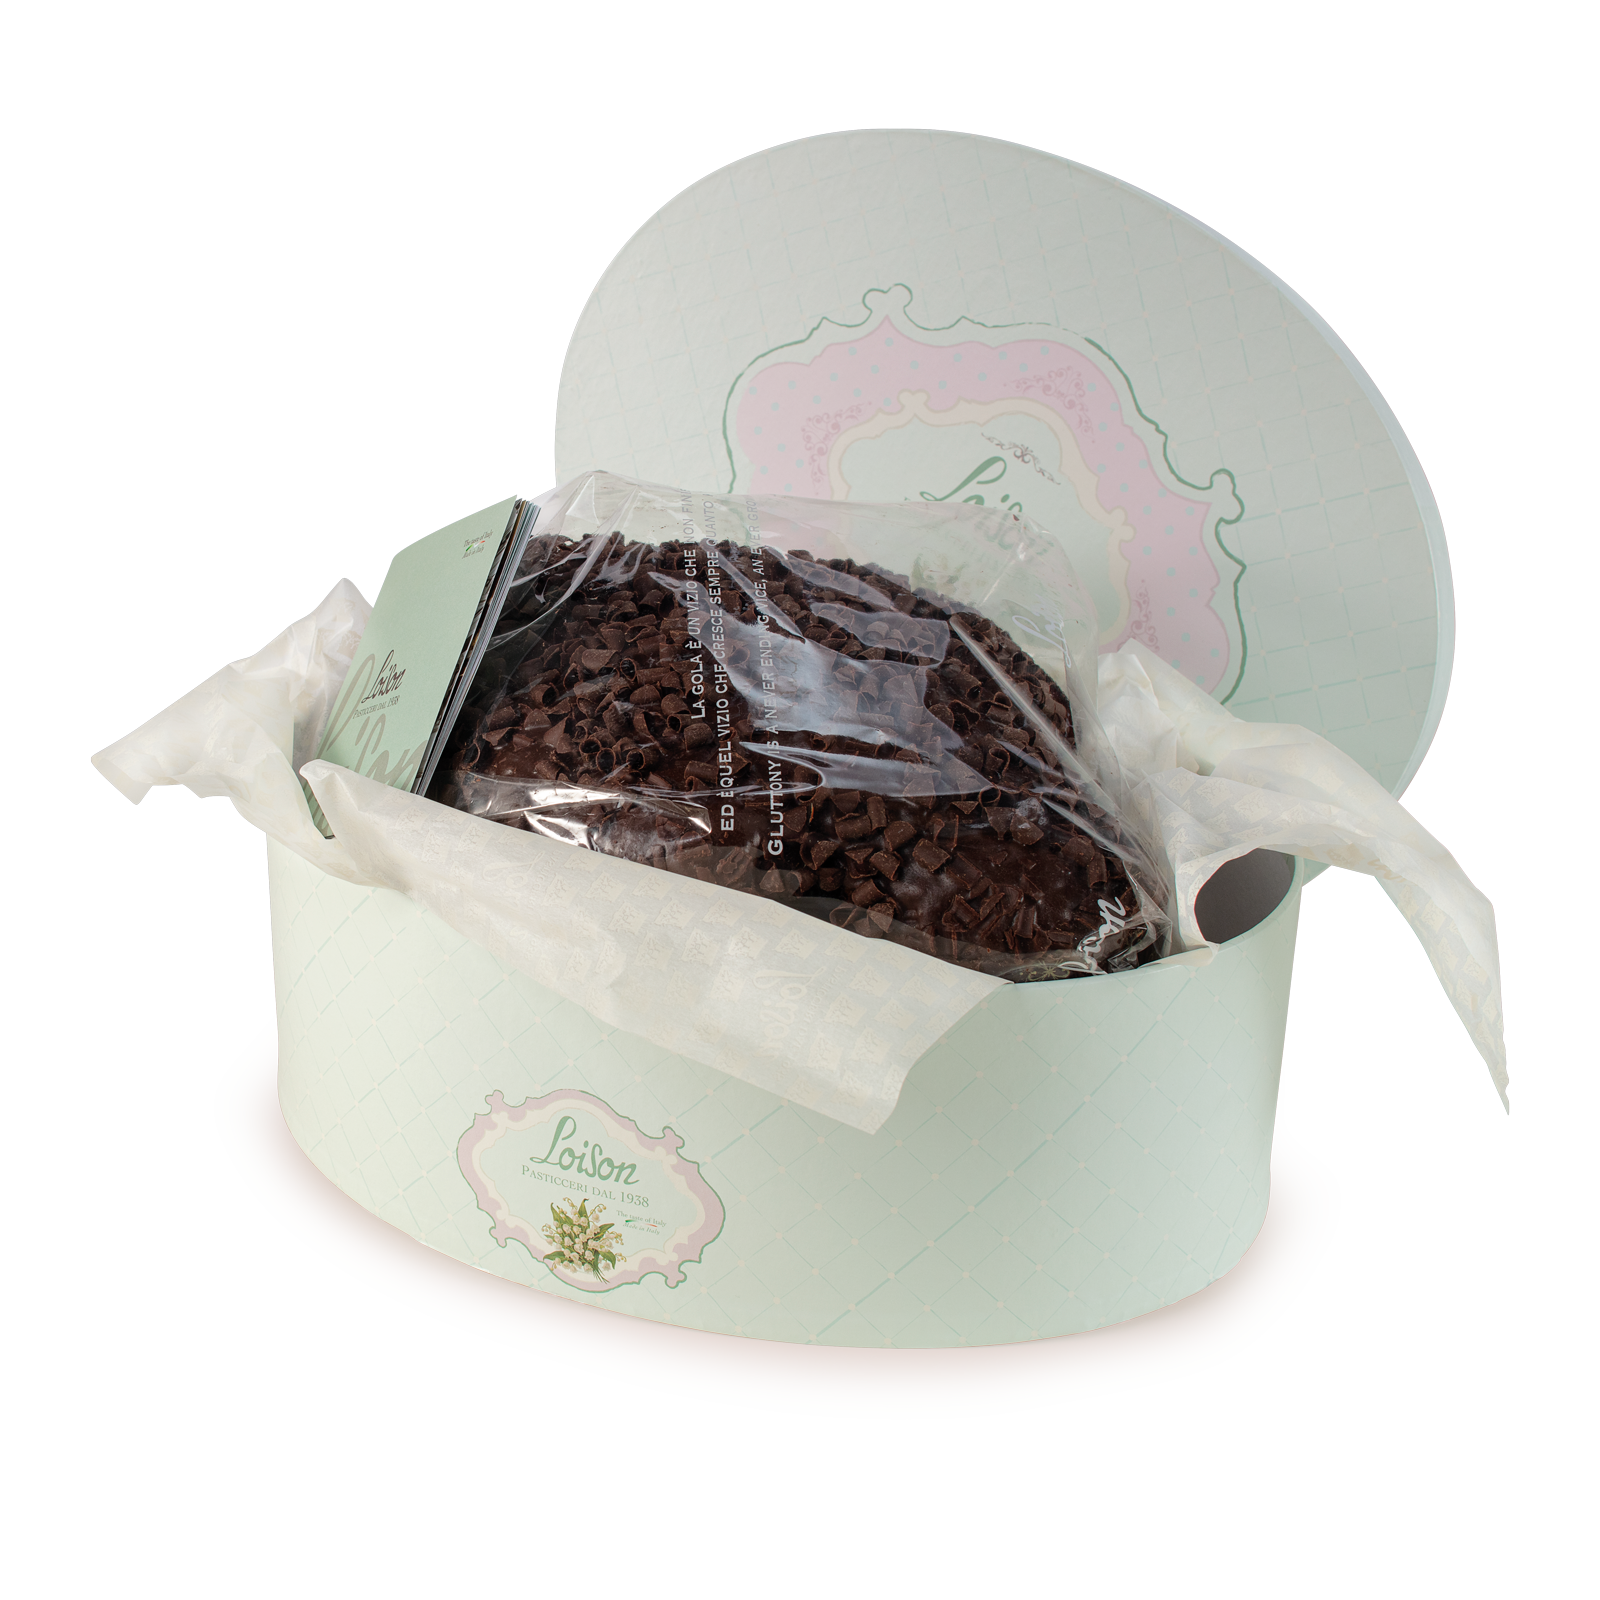 Chocolate Colomba cake in hat box